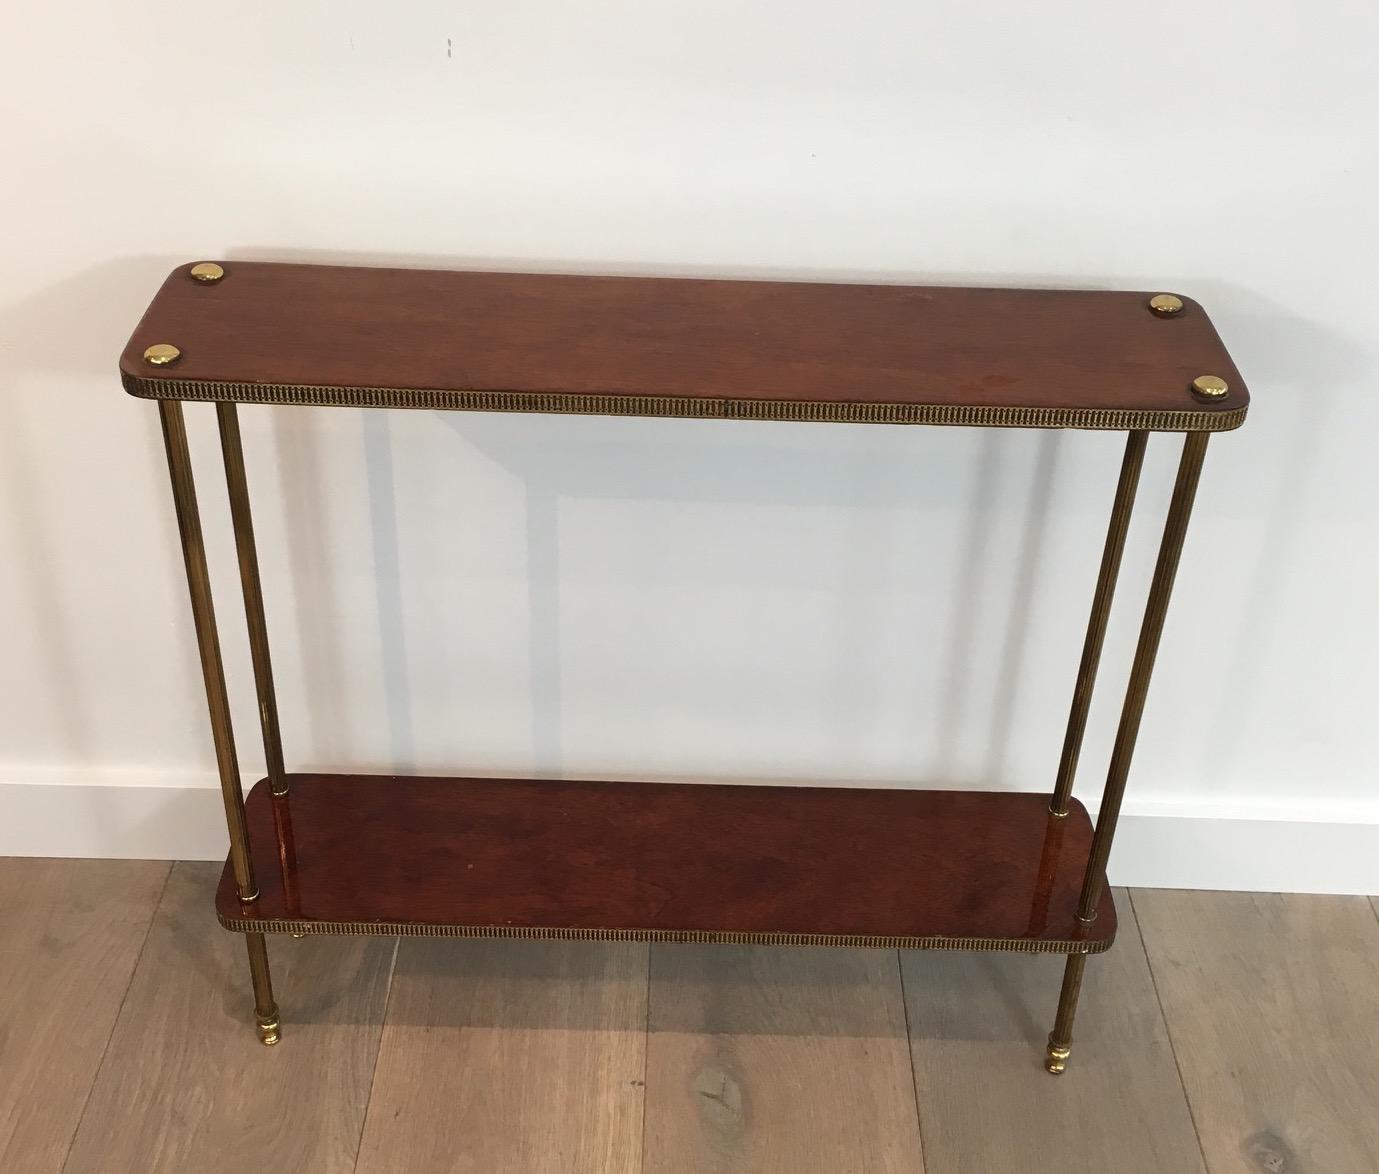 Low neoclassical mahogany and brass shelf with fluted legs, French, circa 1940.